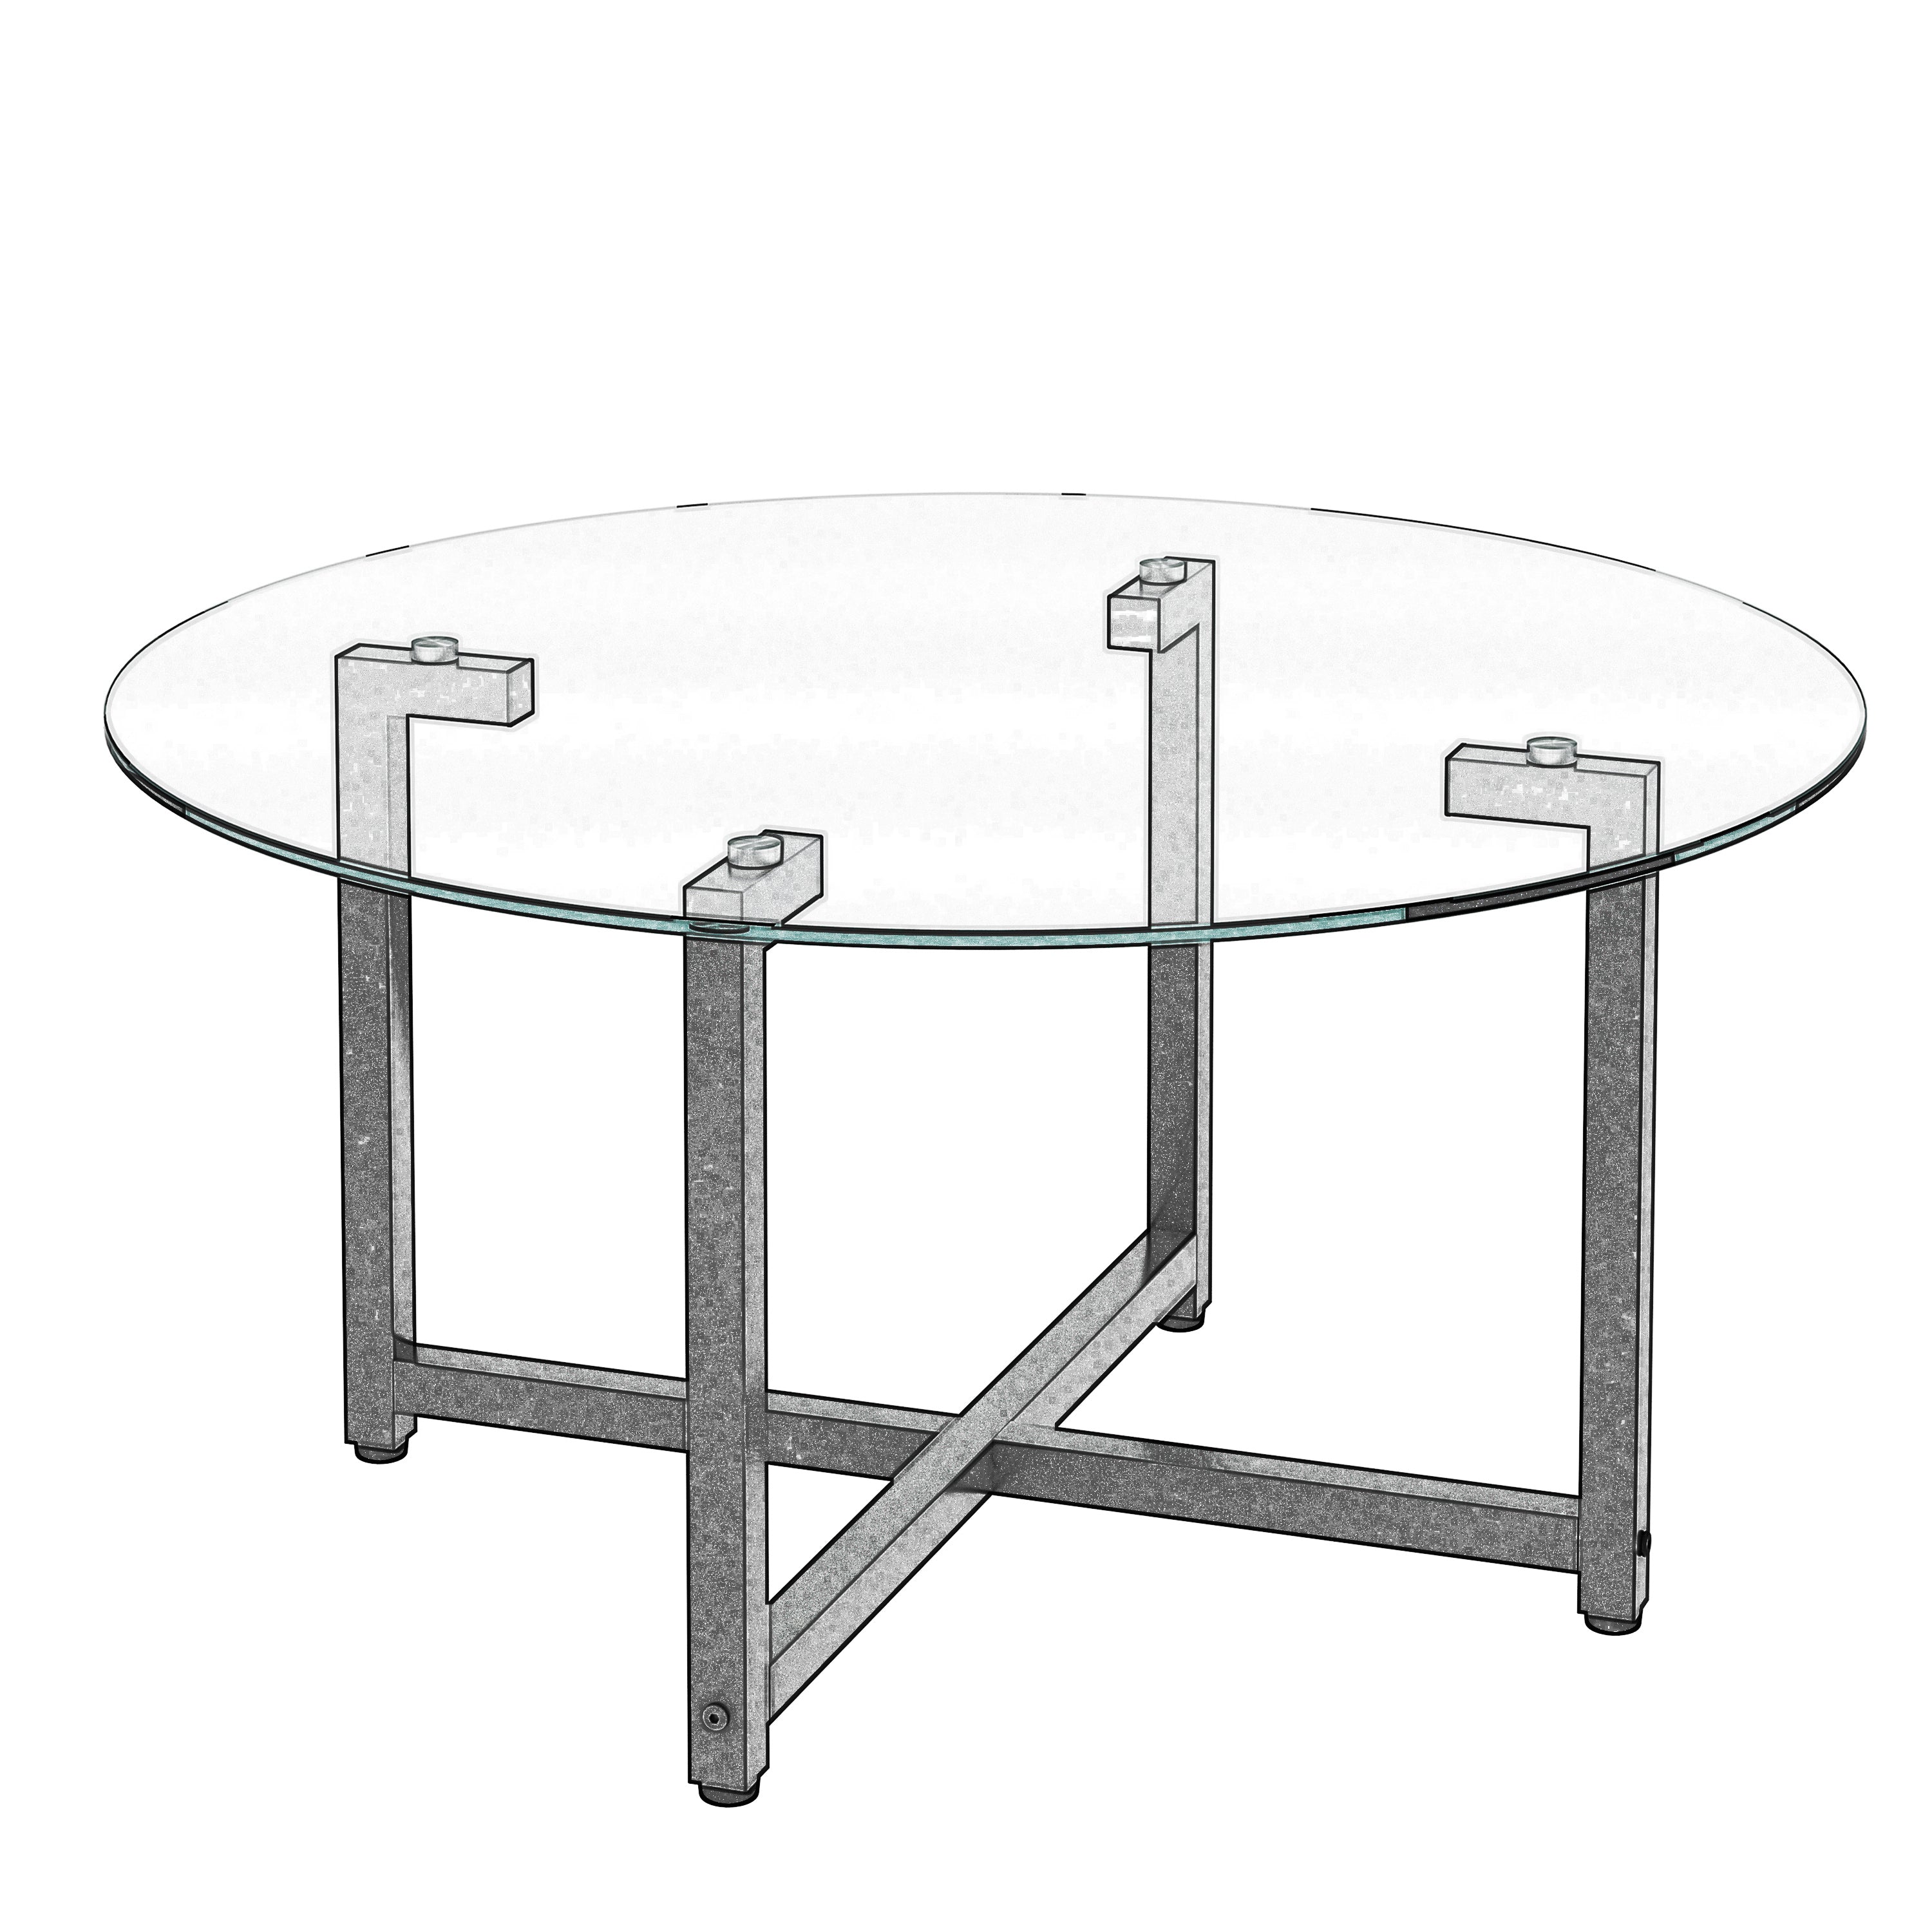 35.5" Round Clear Tempered Glass Coffee Table